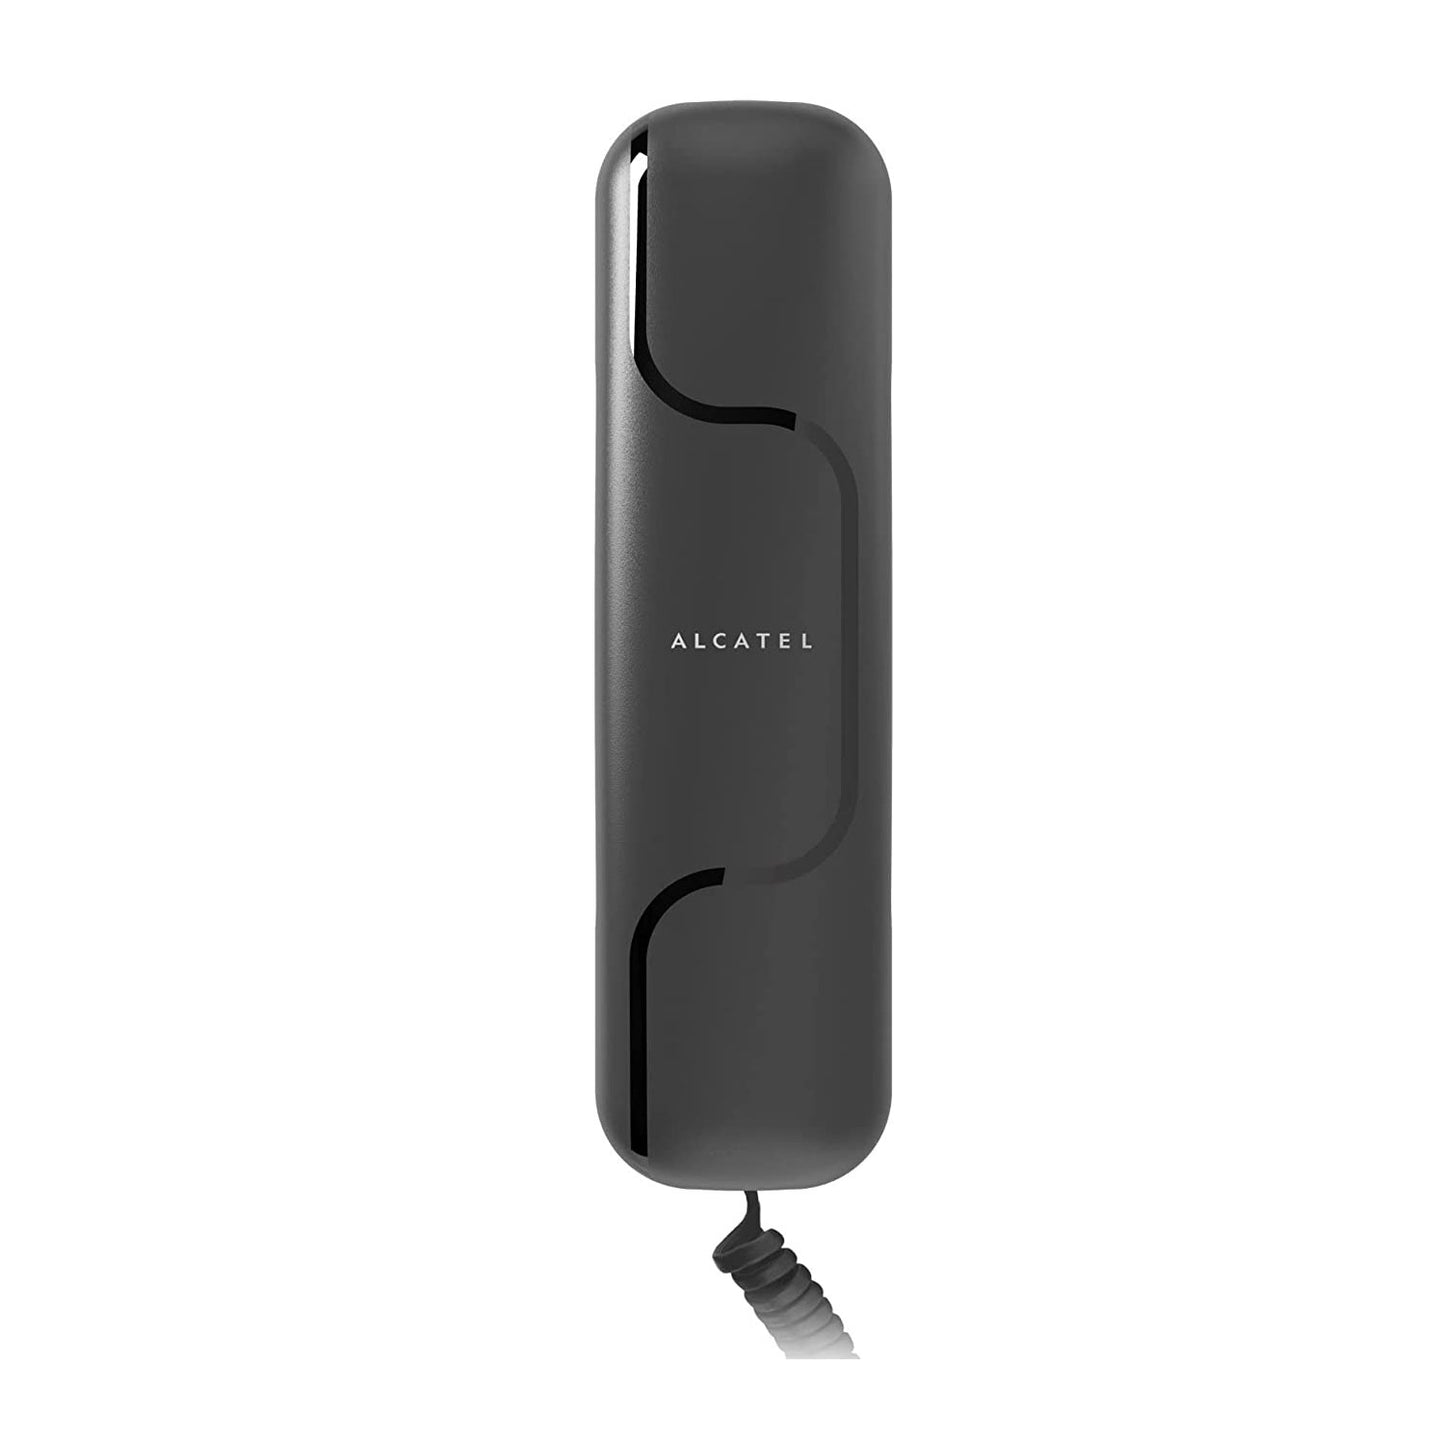 Alcatel T06 Ultra Compact Wall Mount Corded Landline Phone Black (Pack Of 10)